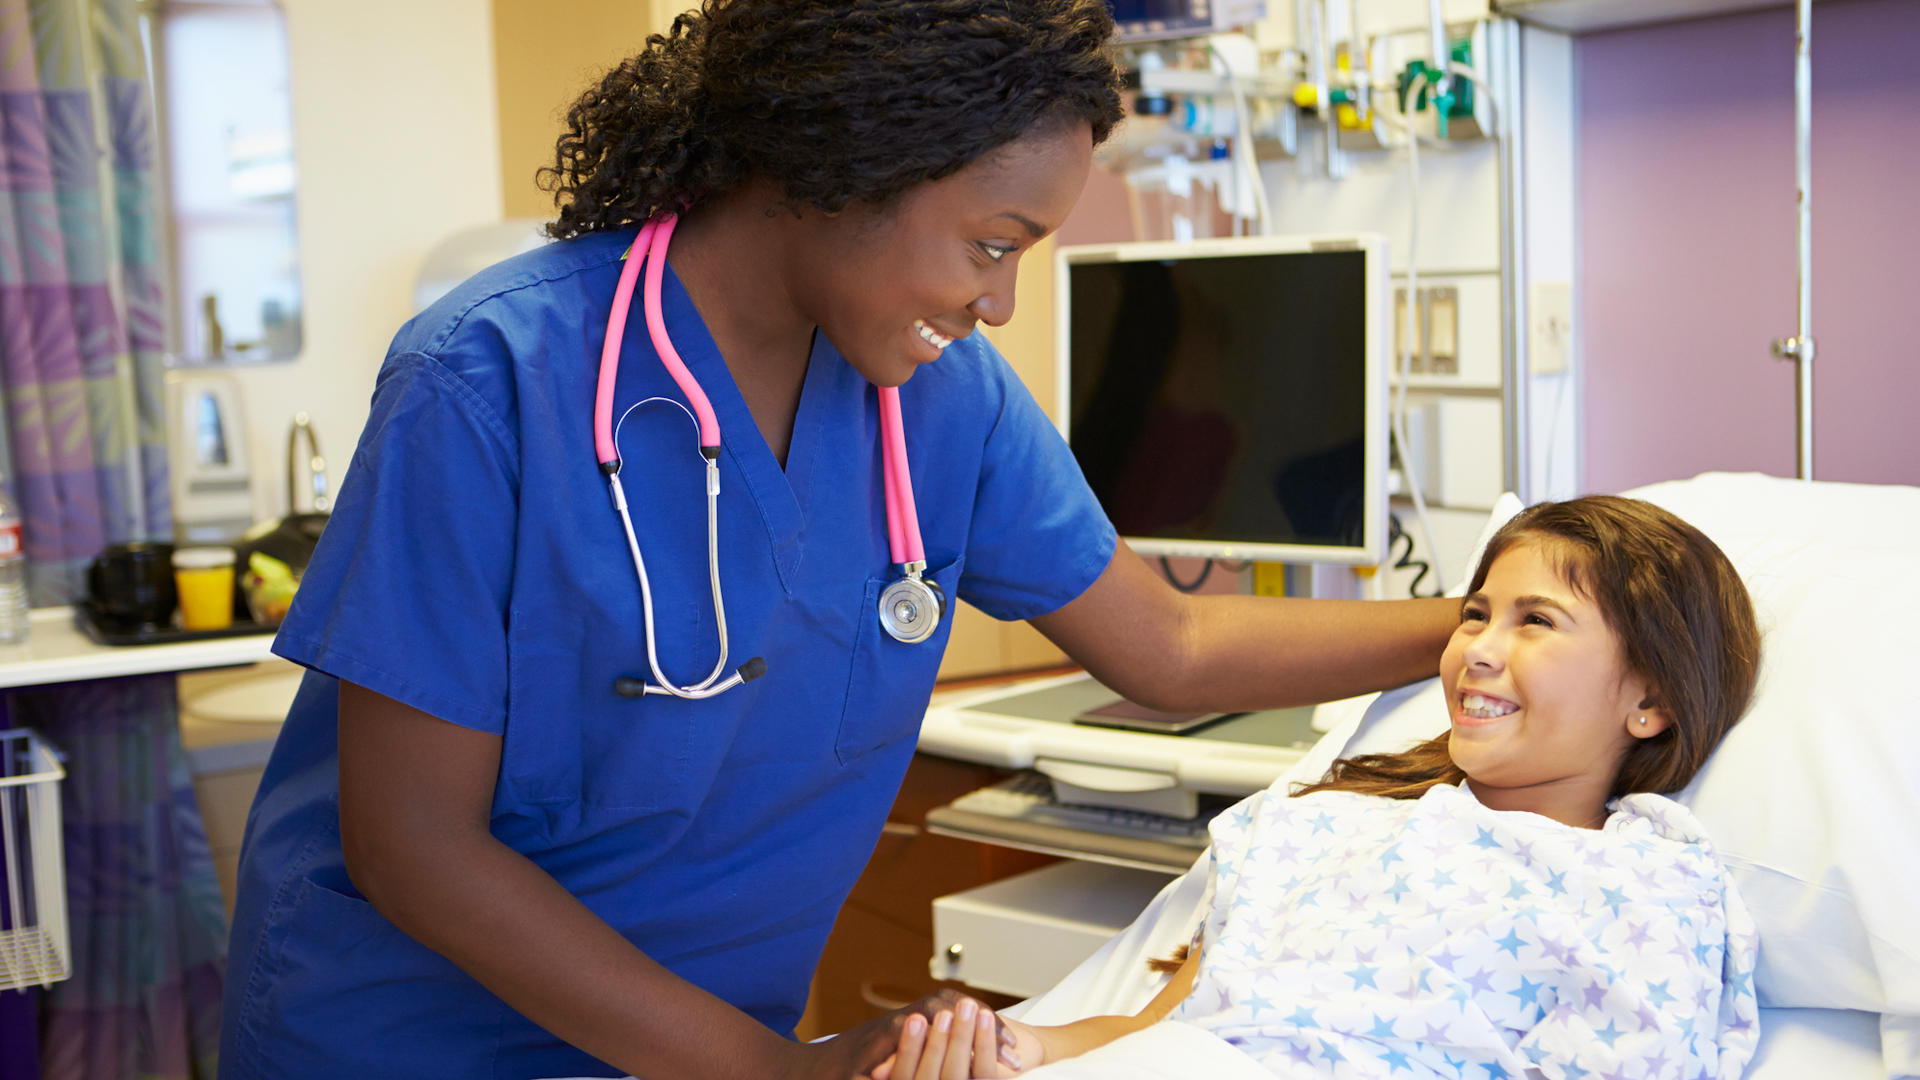 to enable patient empowerment nurses need to recognize that